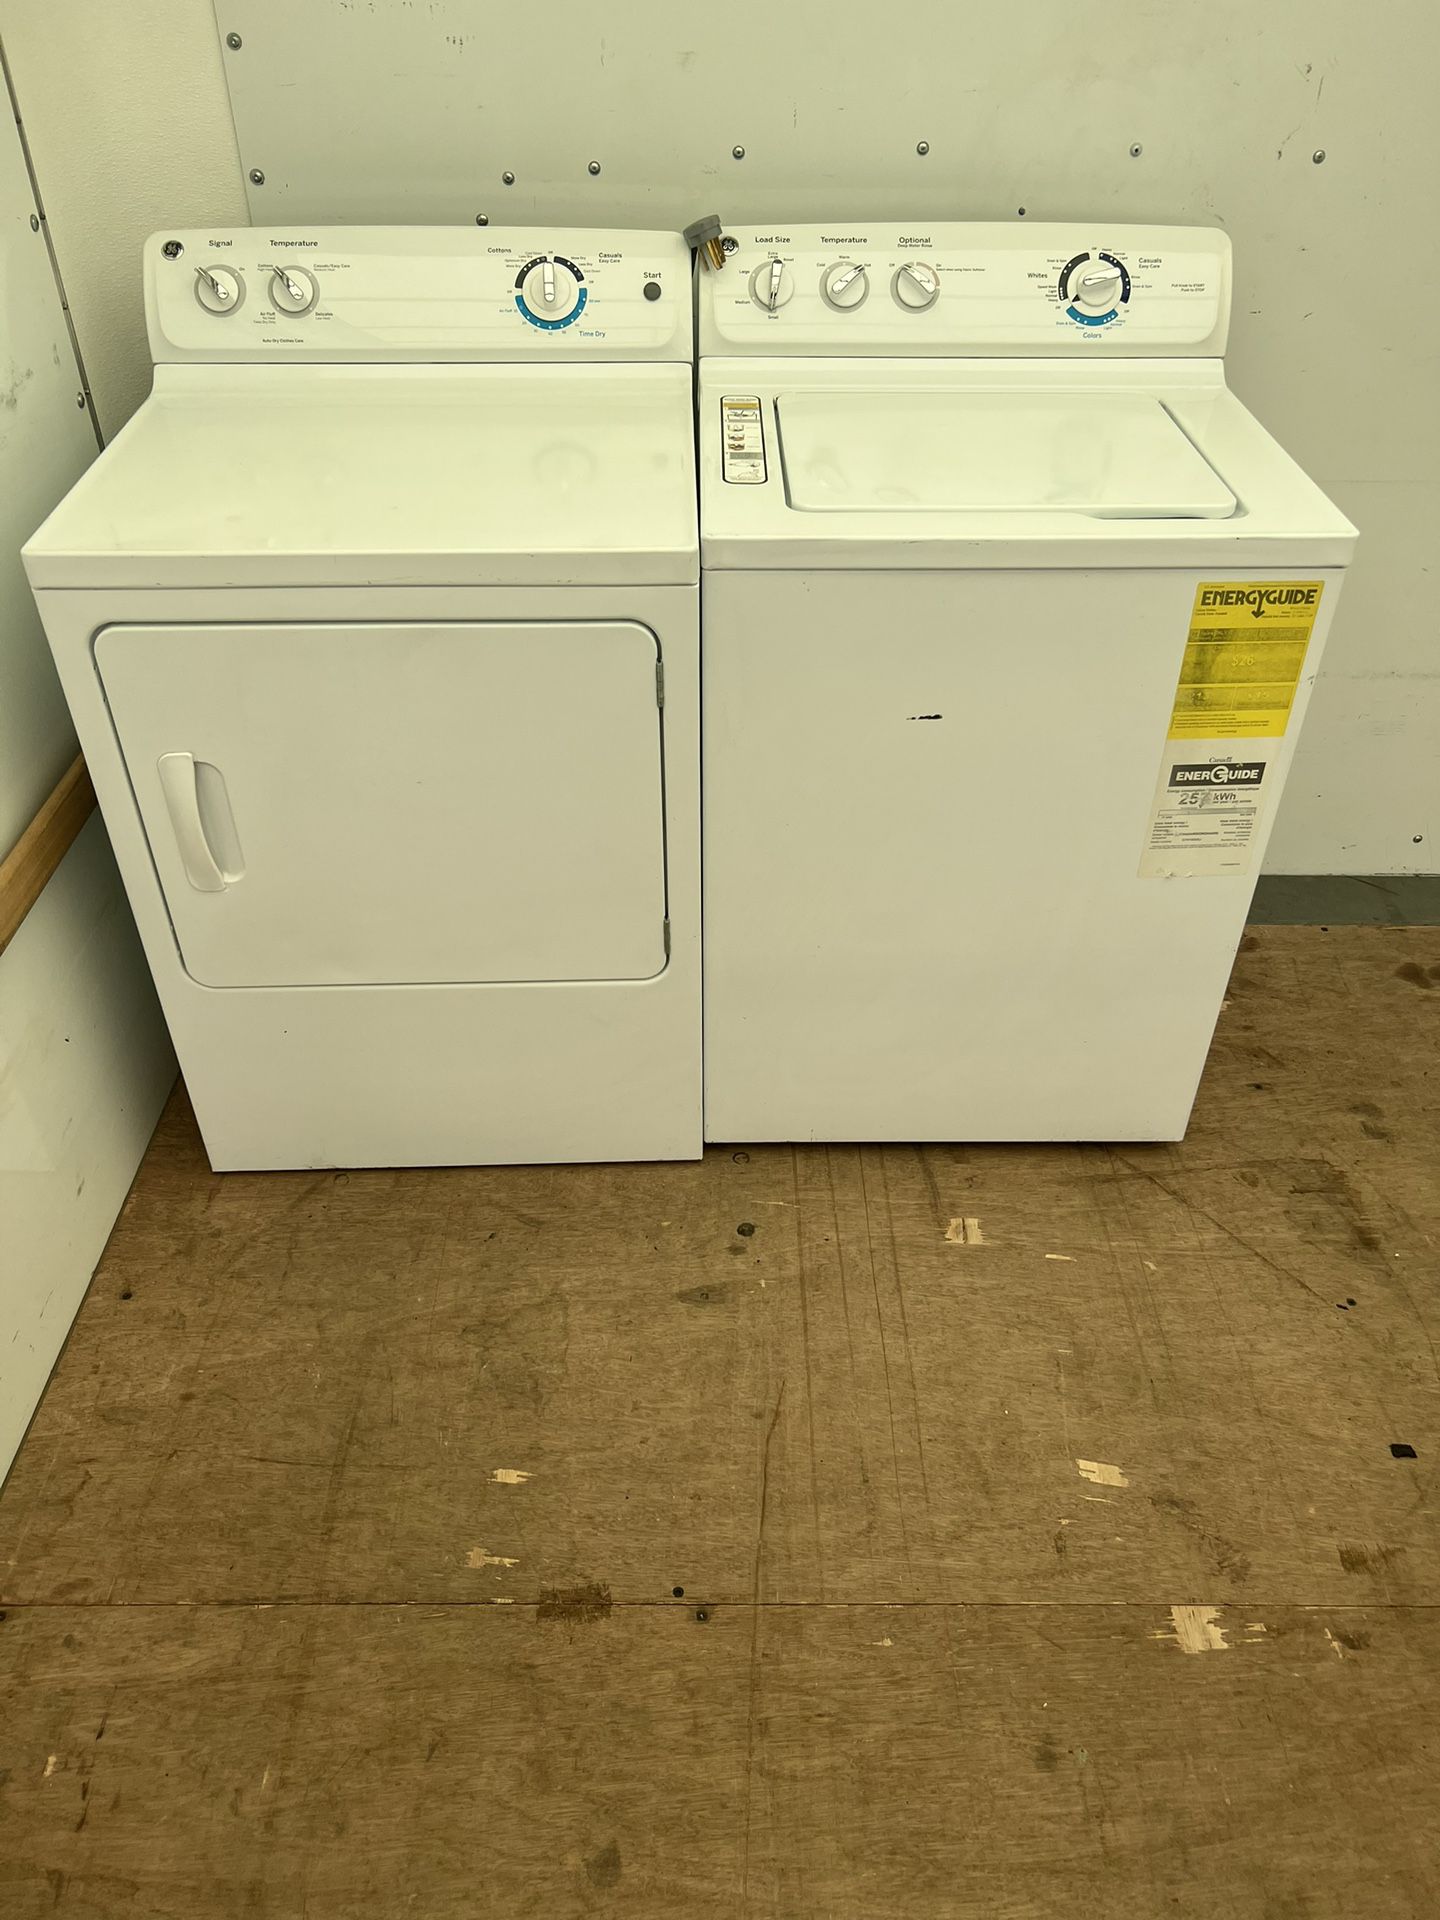 General Electric Washer & Dryer